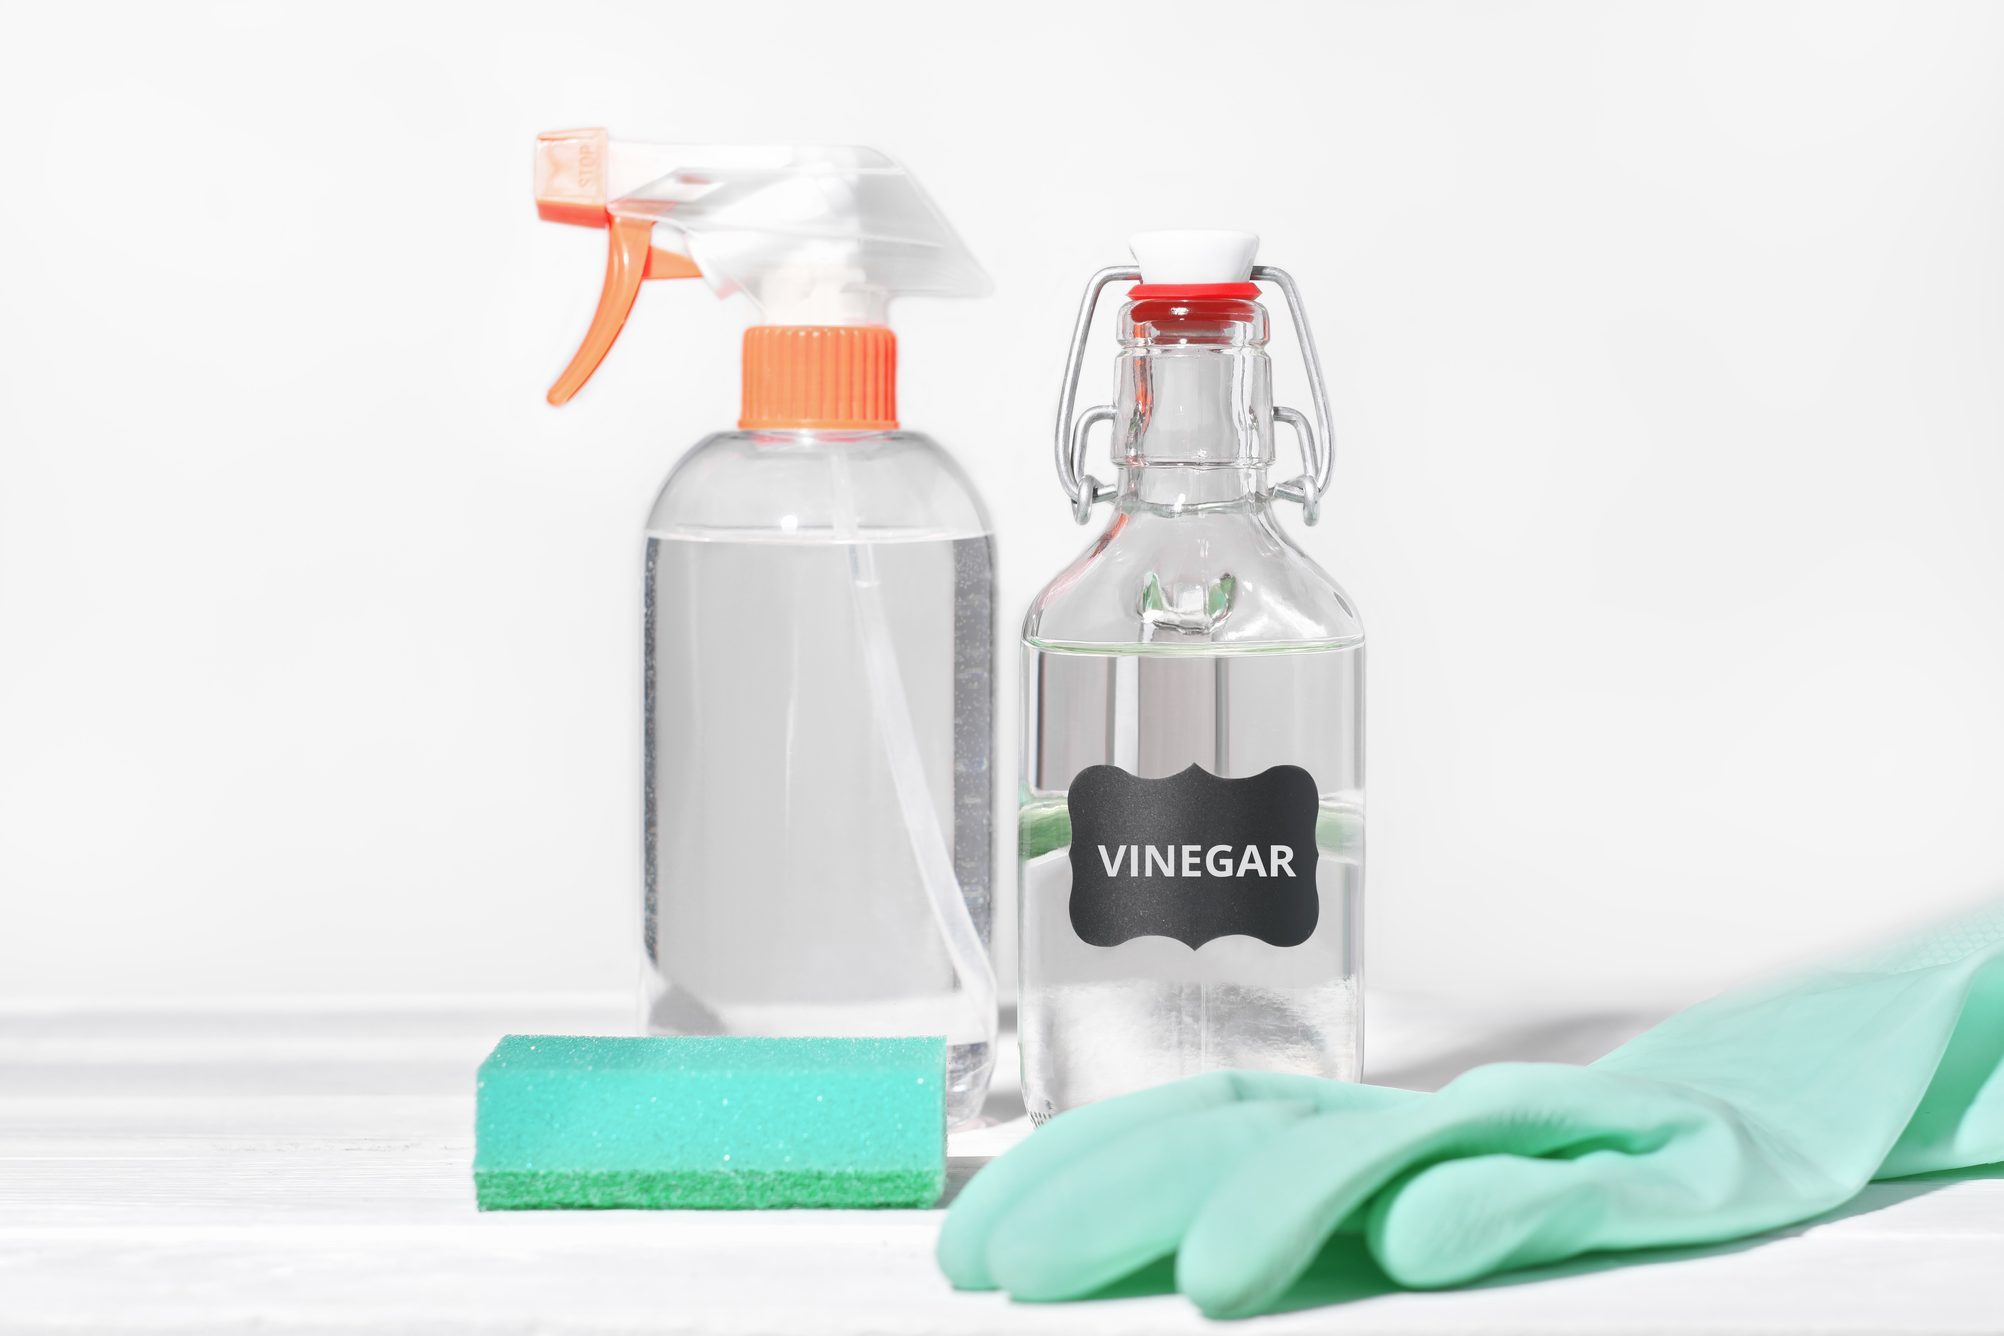 Housework white vinegar, natural household detergent, inexpensive cleaning product, rubber glove and kitchen sponge next to spray bottle.